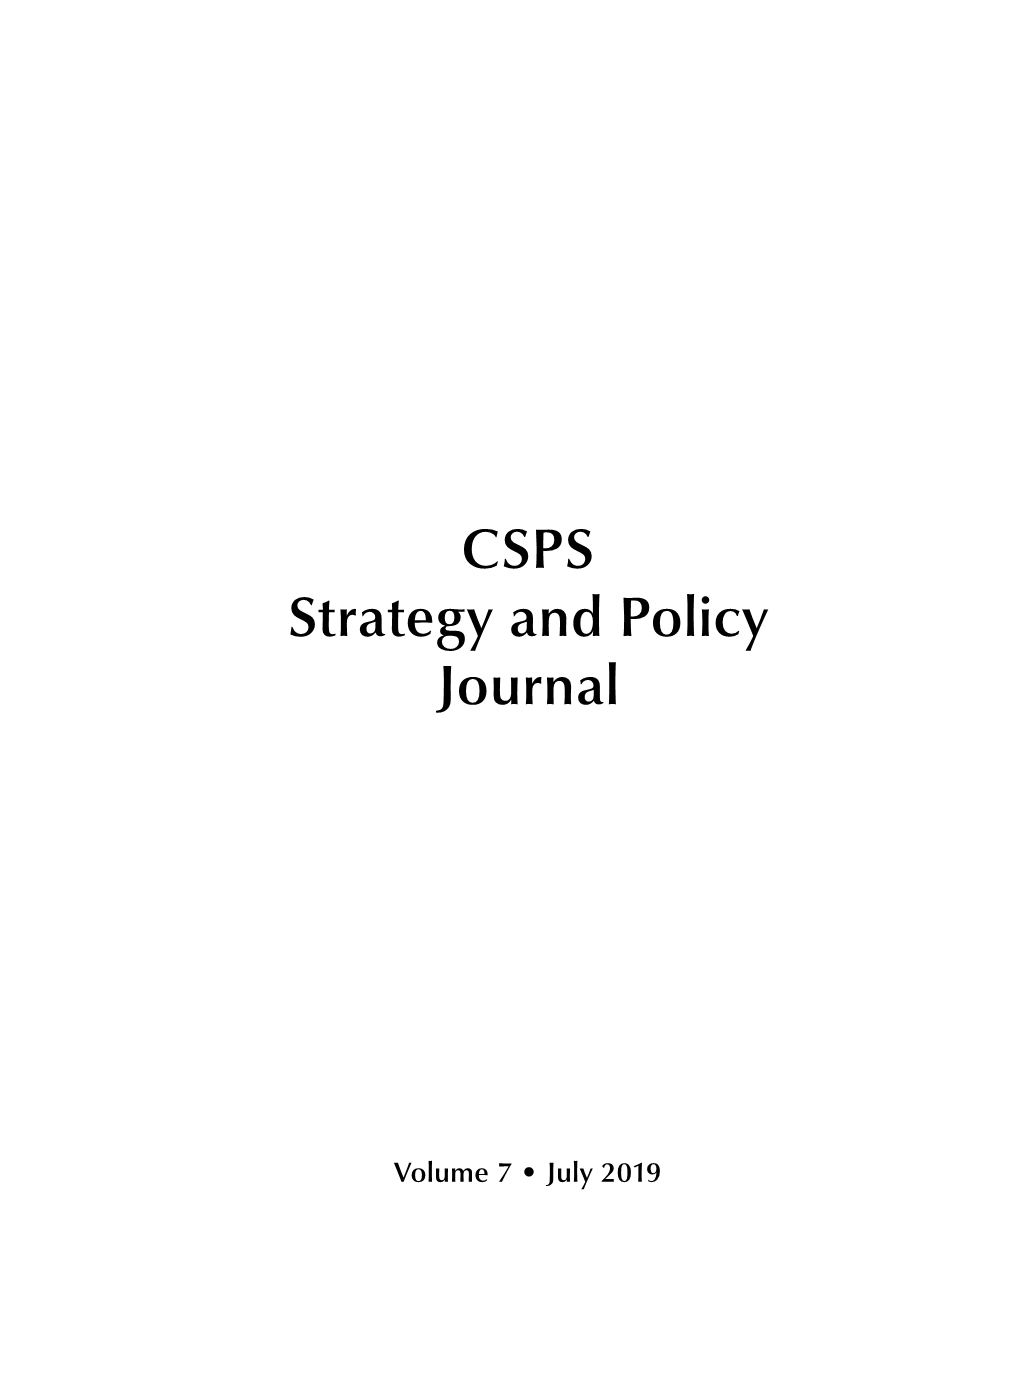 CSPS Strategy and Policy Journal